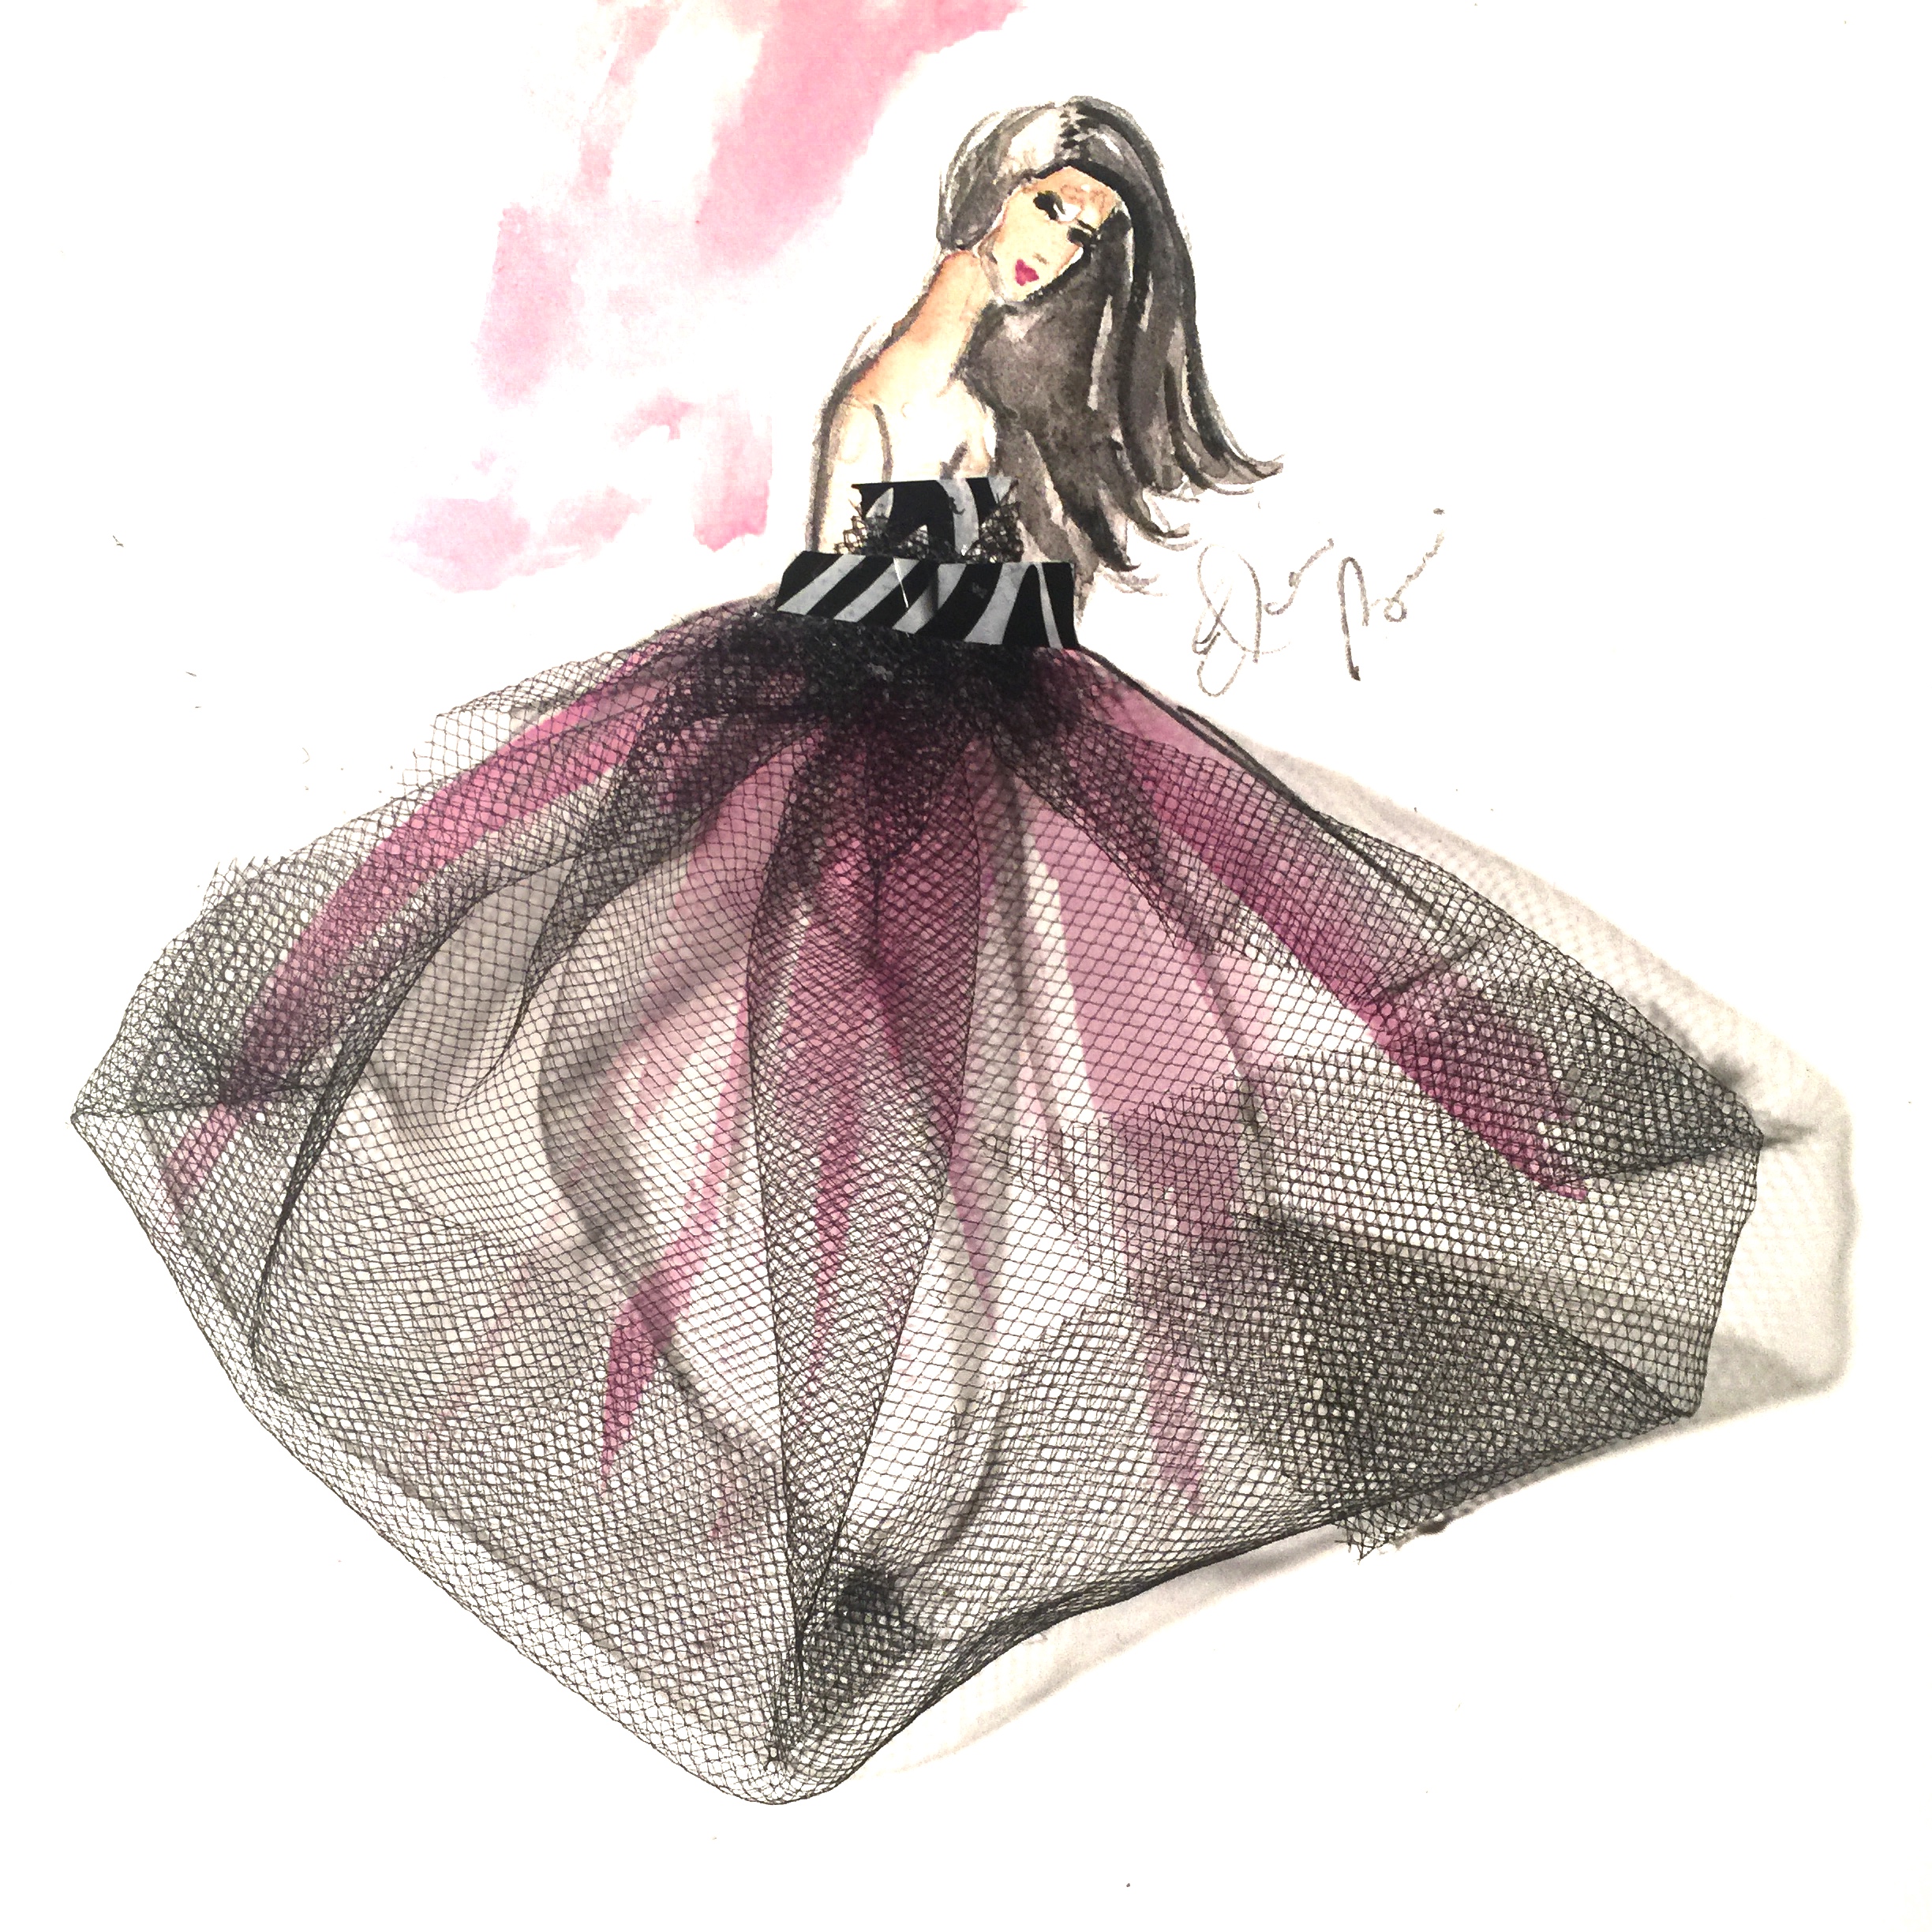 Watercolor and Tulle Dress Fashion Illustration â€¢ Elaine Biss | Elaine Biss